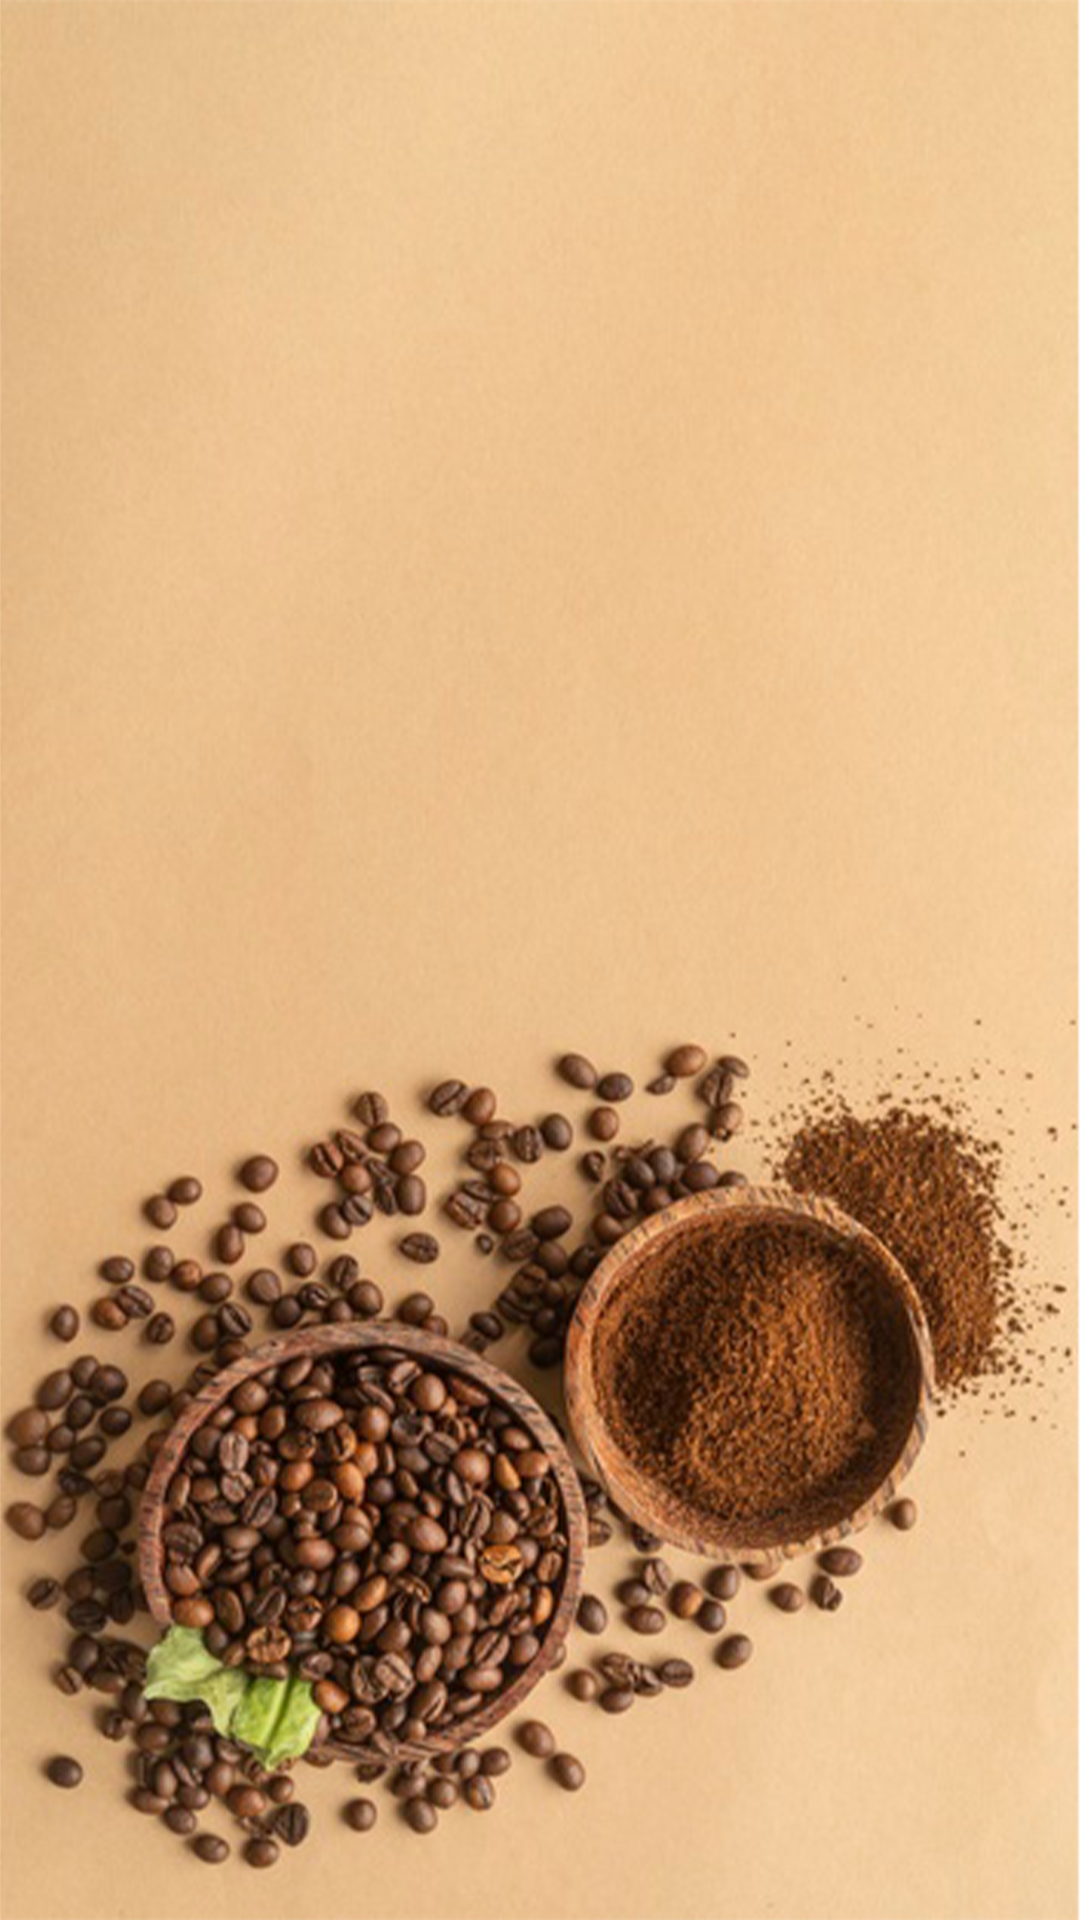 What is the carbohydrate content of coffee?